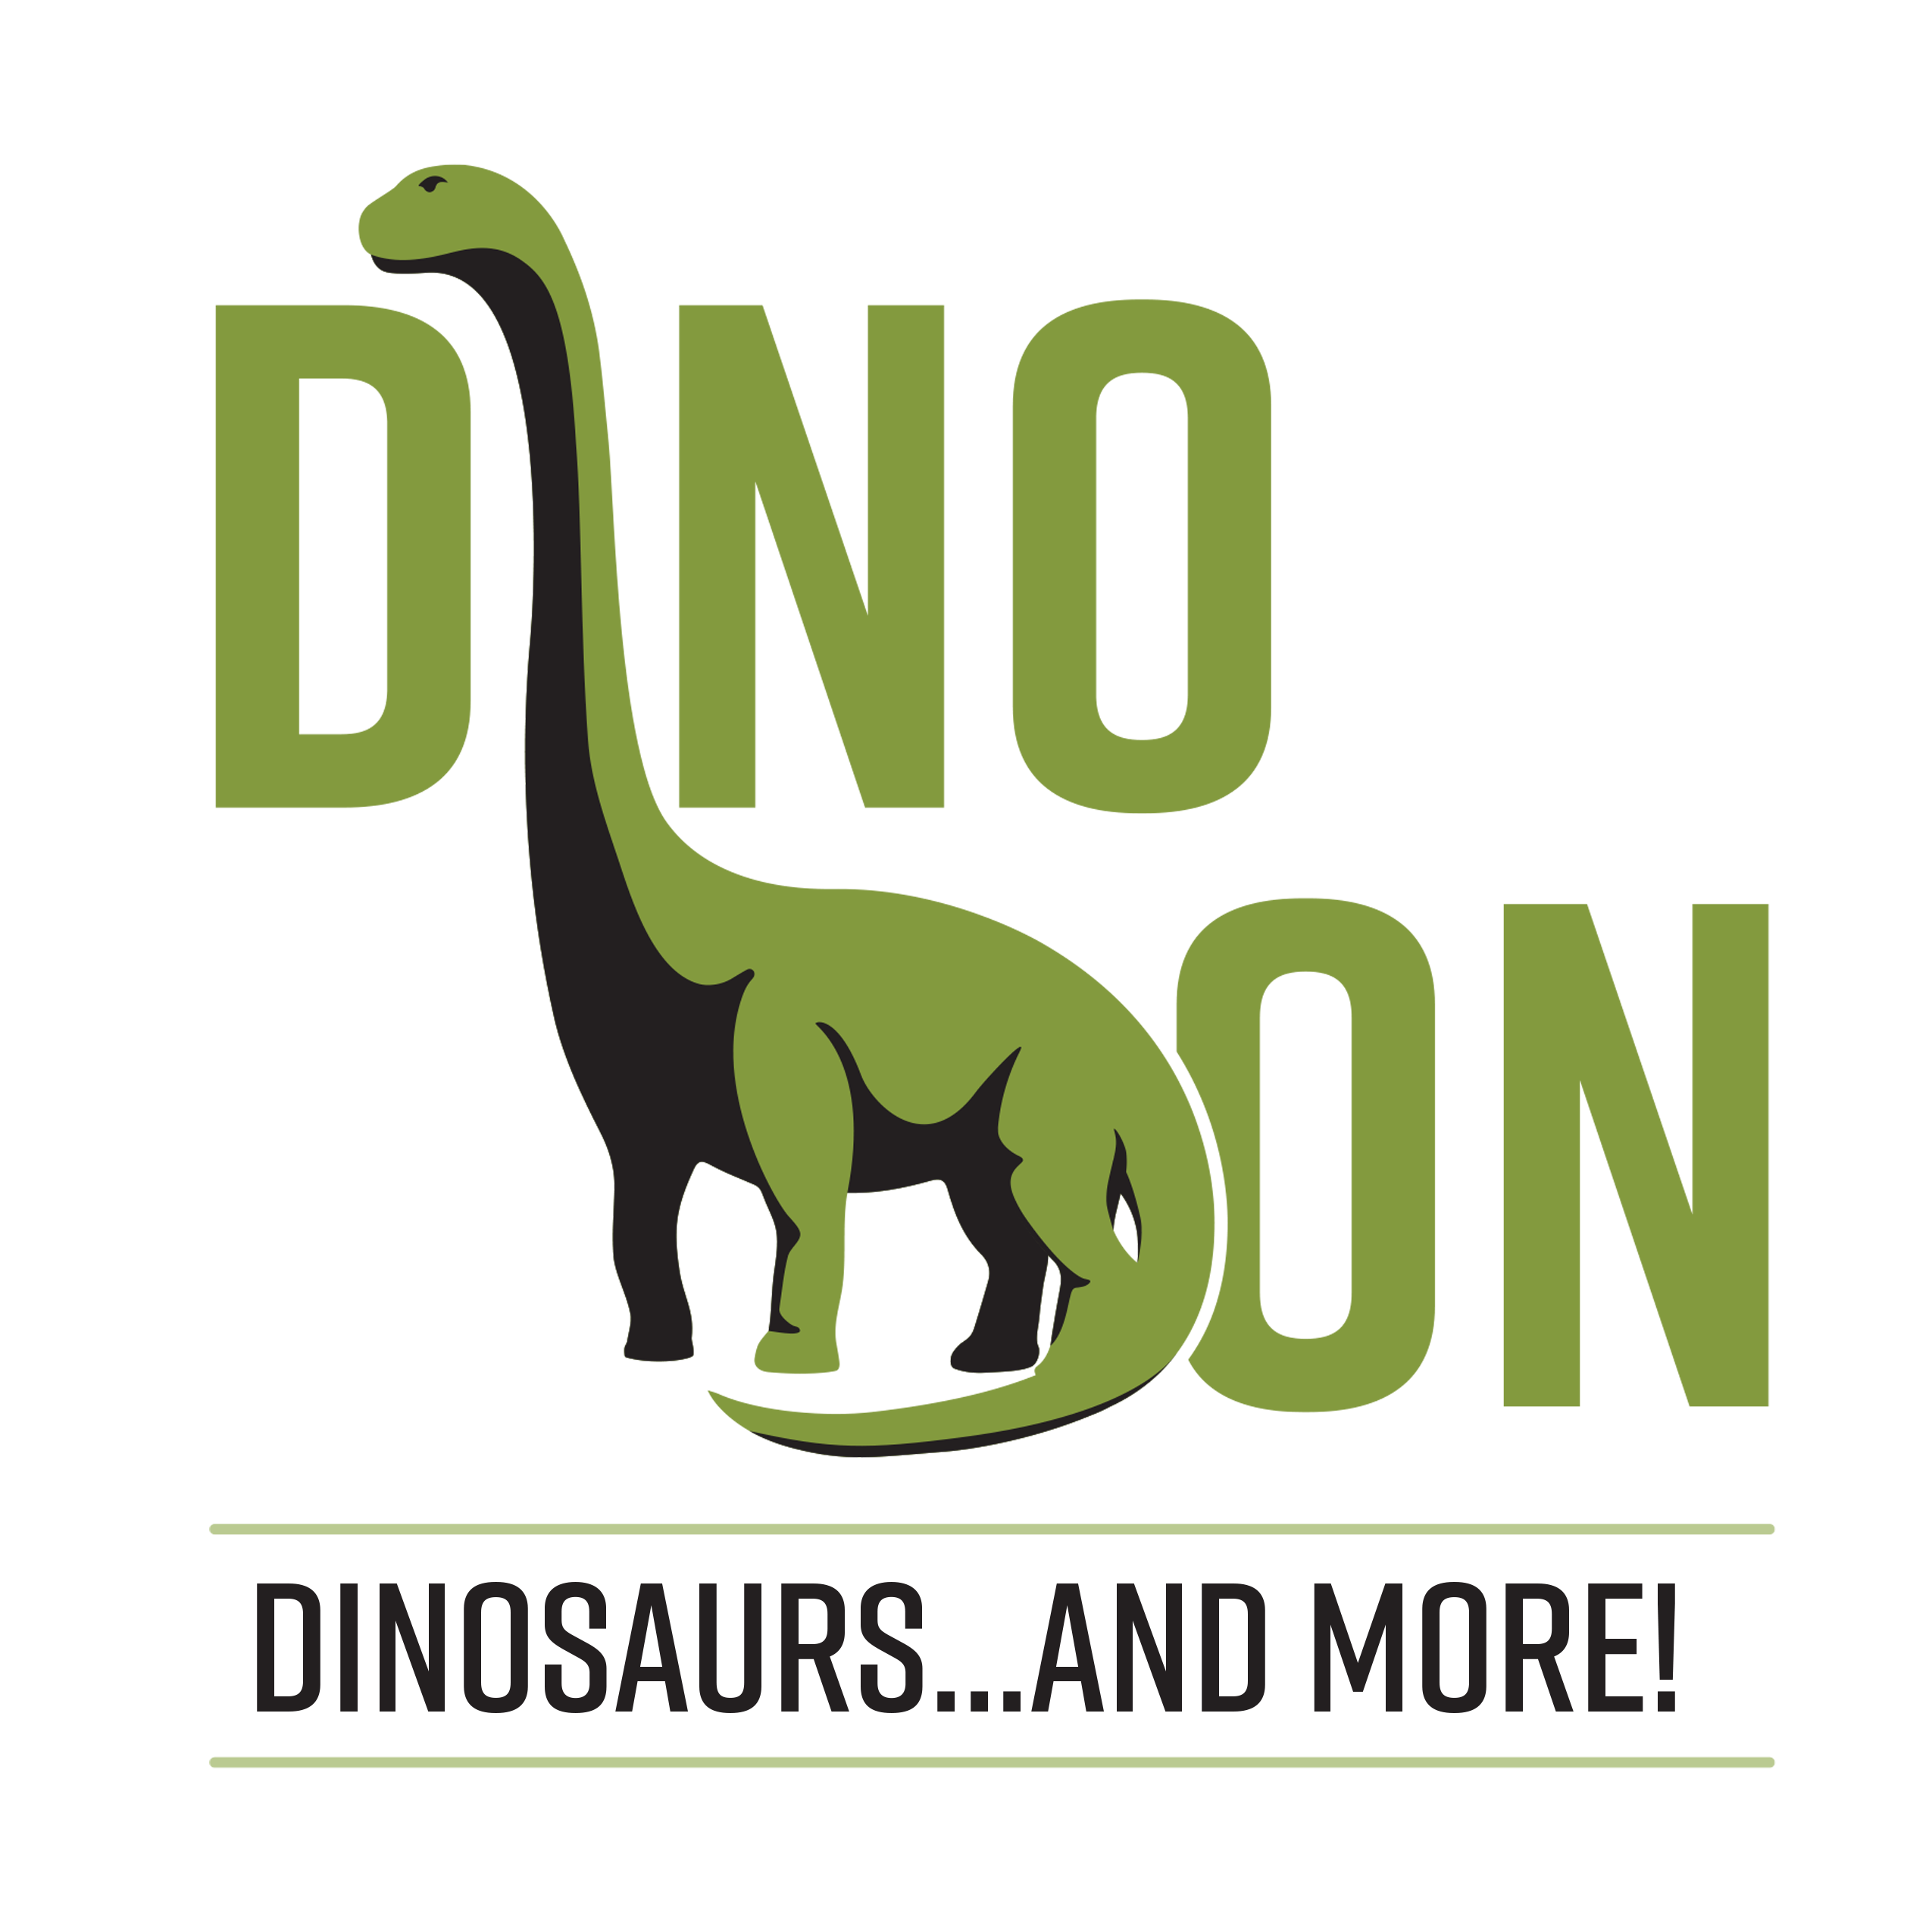 Dino Don, Inc. More than just Dinosaurs